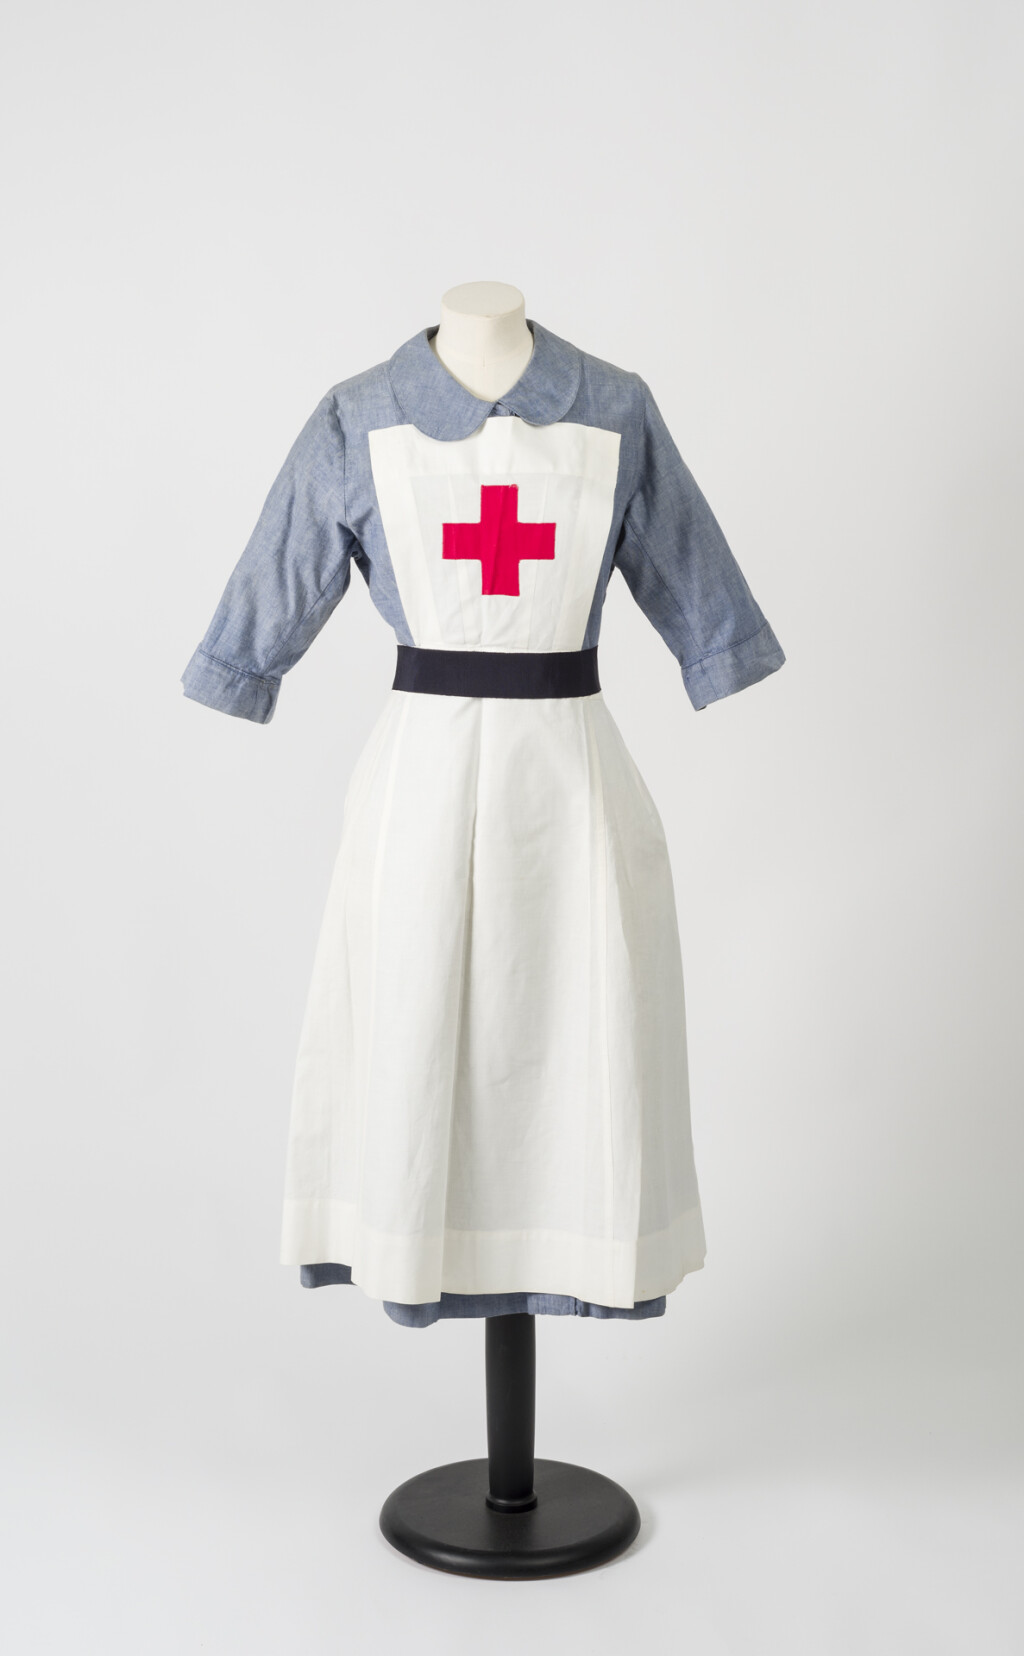 Hetty Edward's Red Cross uniform [from the collections at St Fagans National Museum of History] 